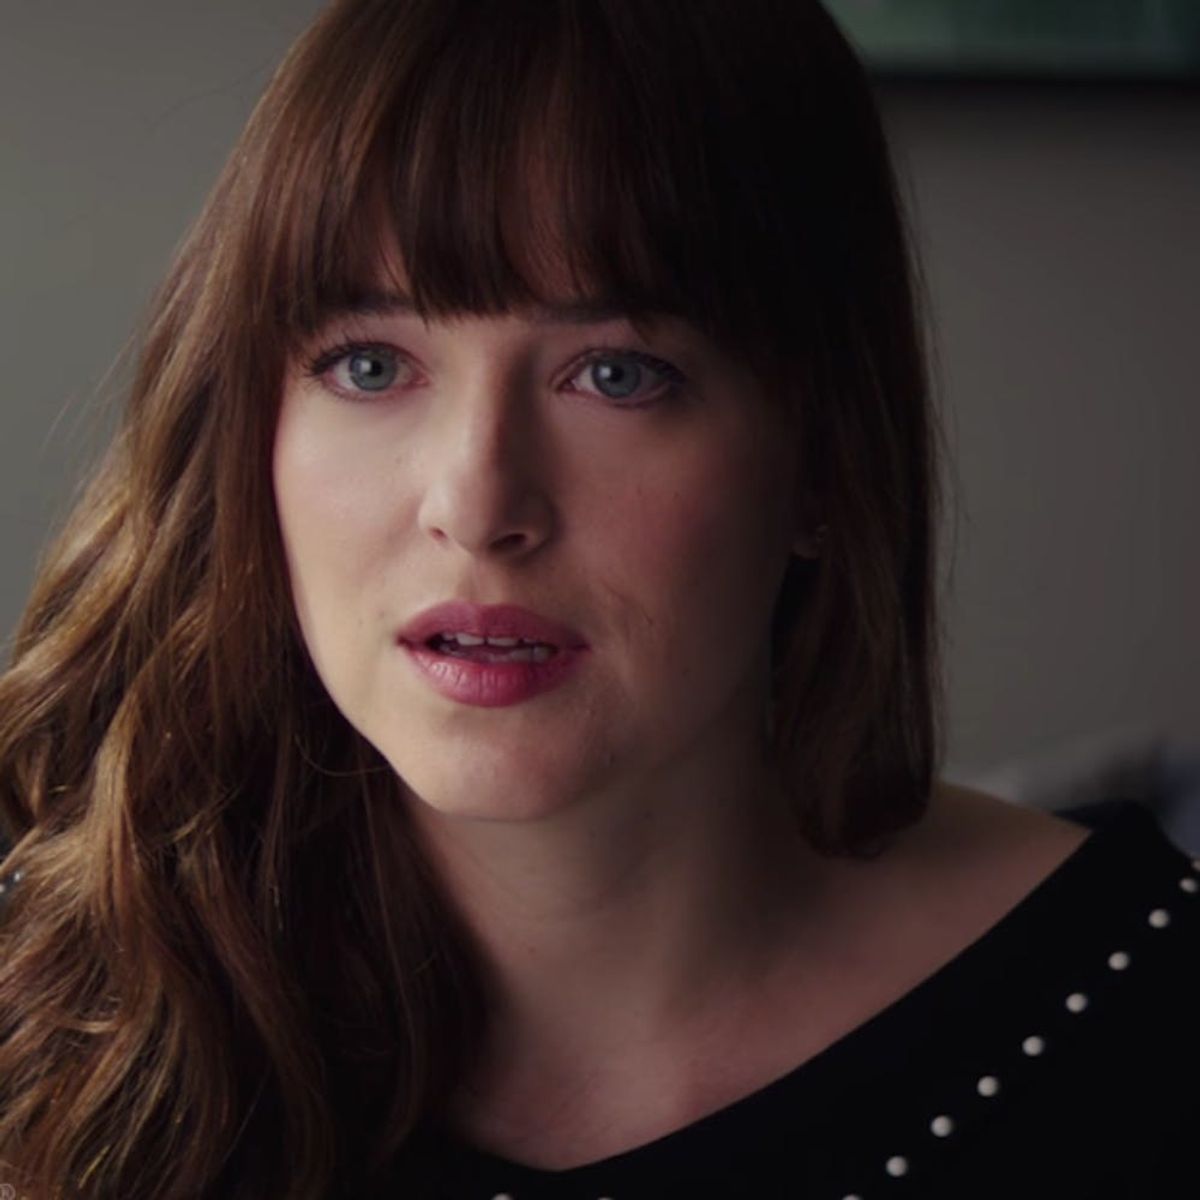 Anastasia Learns She’s Pregnant in the New ‘Fifty Shades Freed’ Trailer